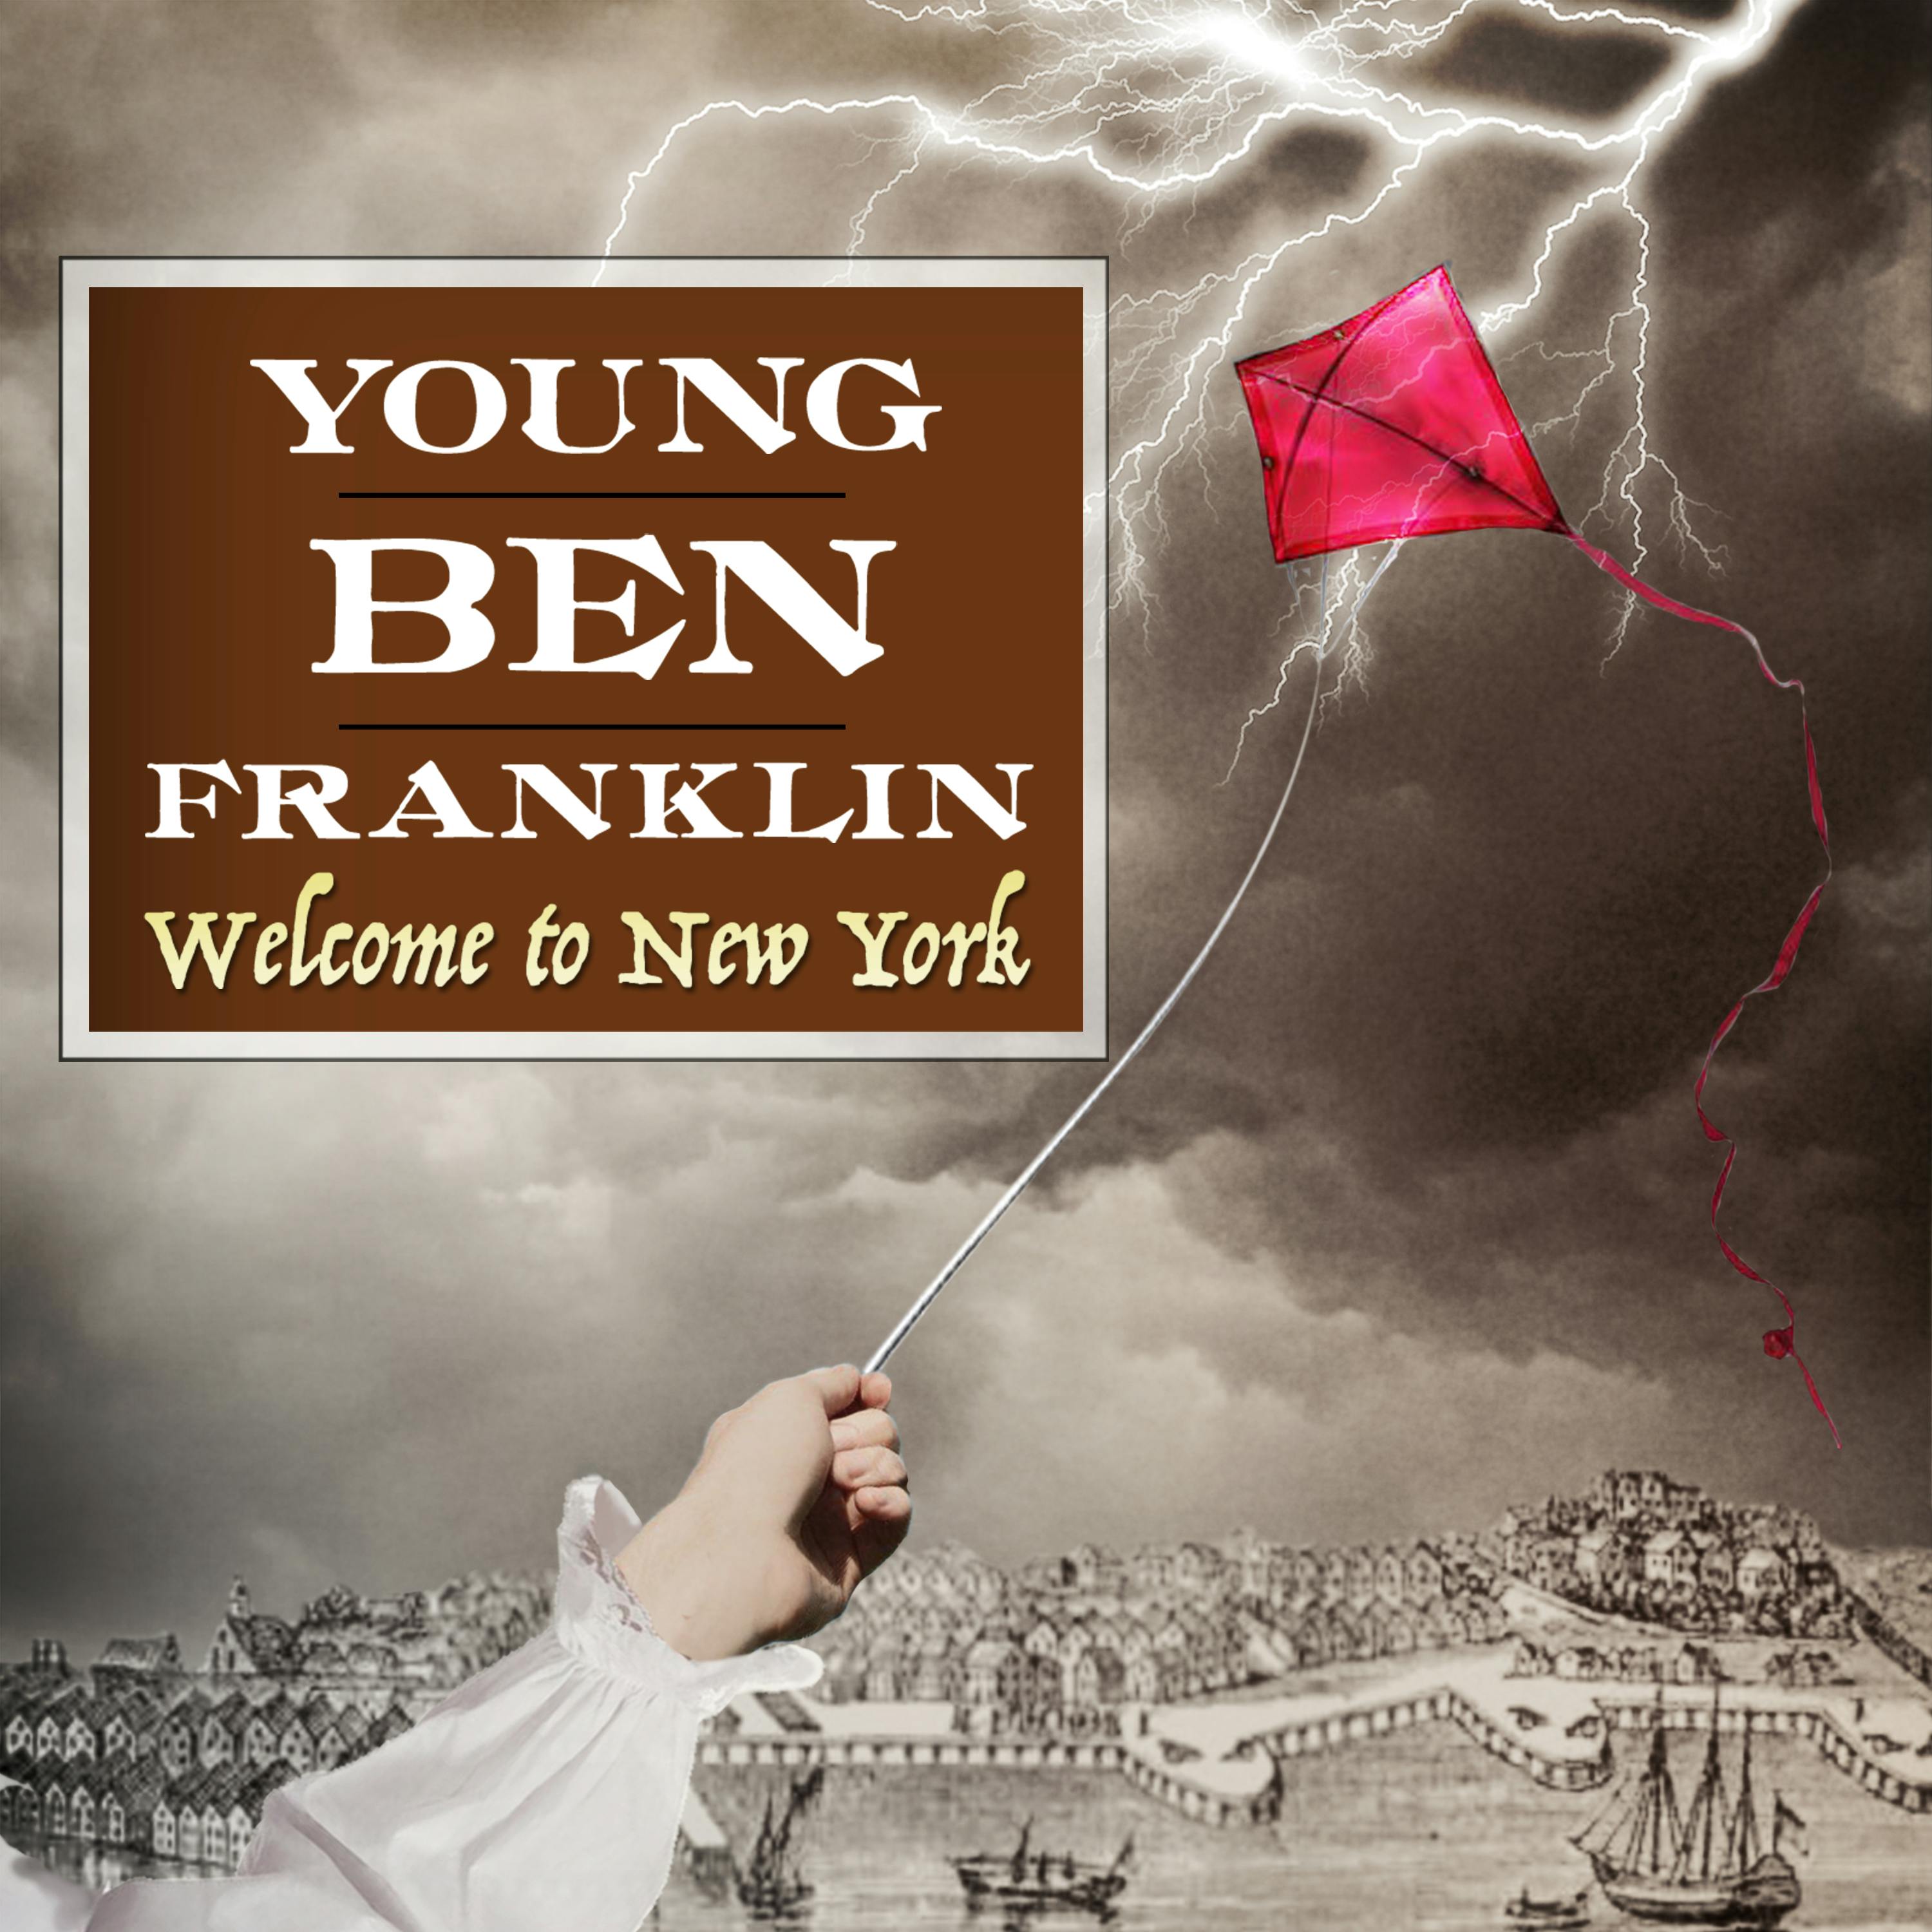 Connecting with Ben Franklin